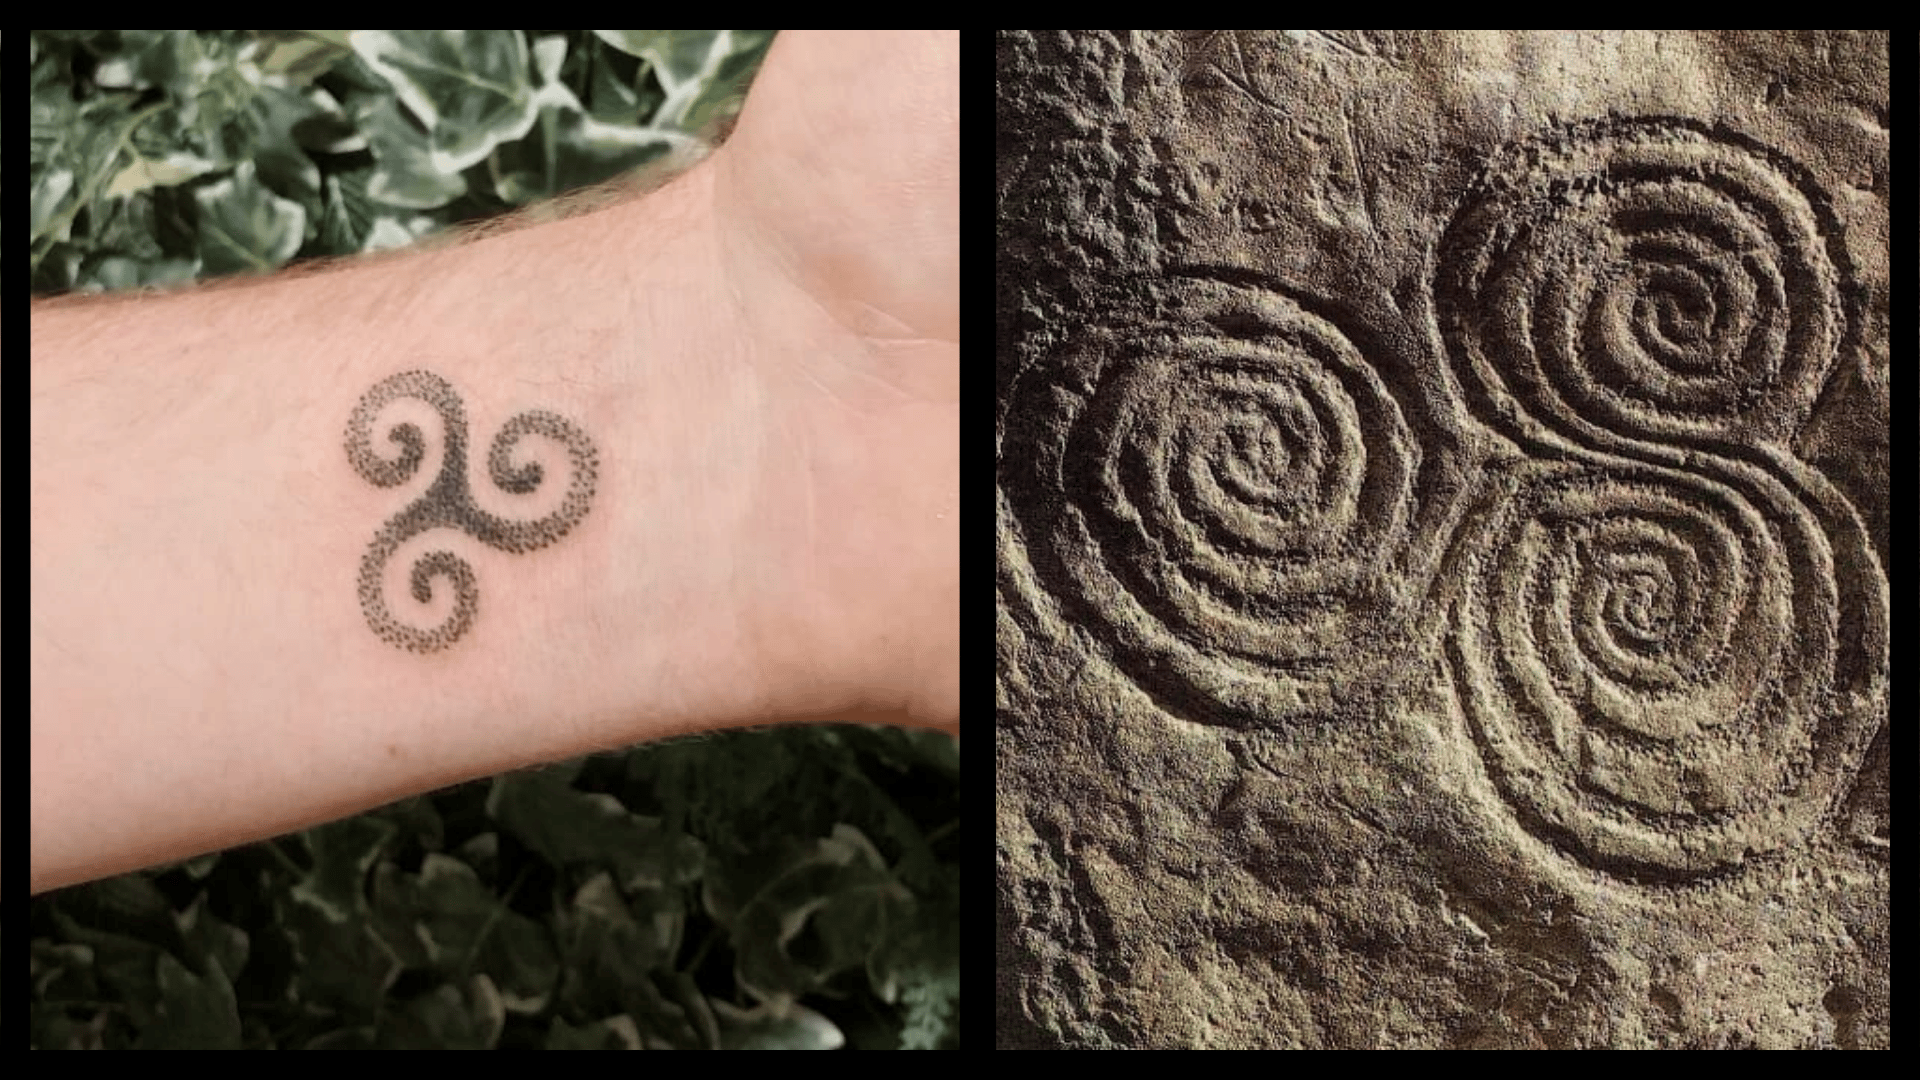 The Triskelion (Triskele): MEANING and HISTORY of symbol